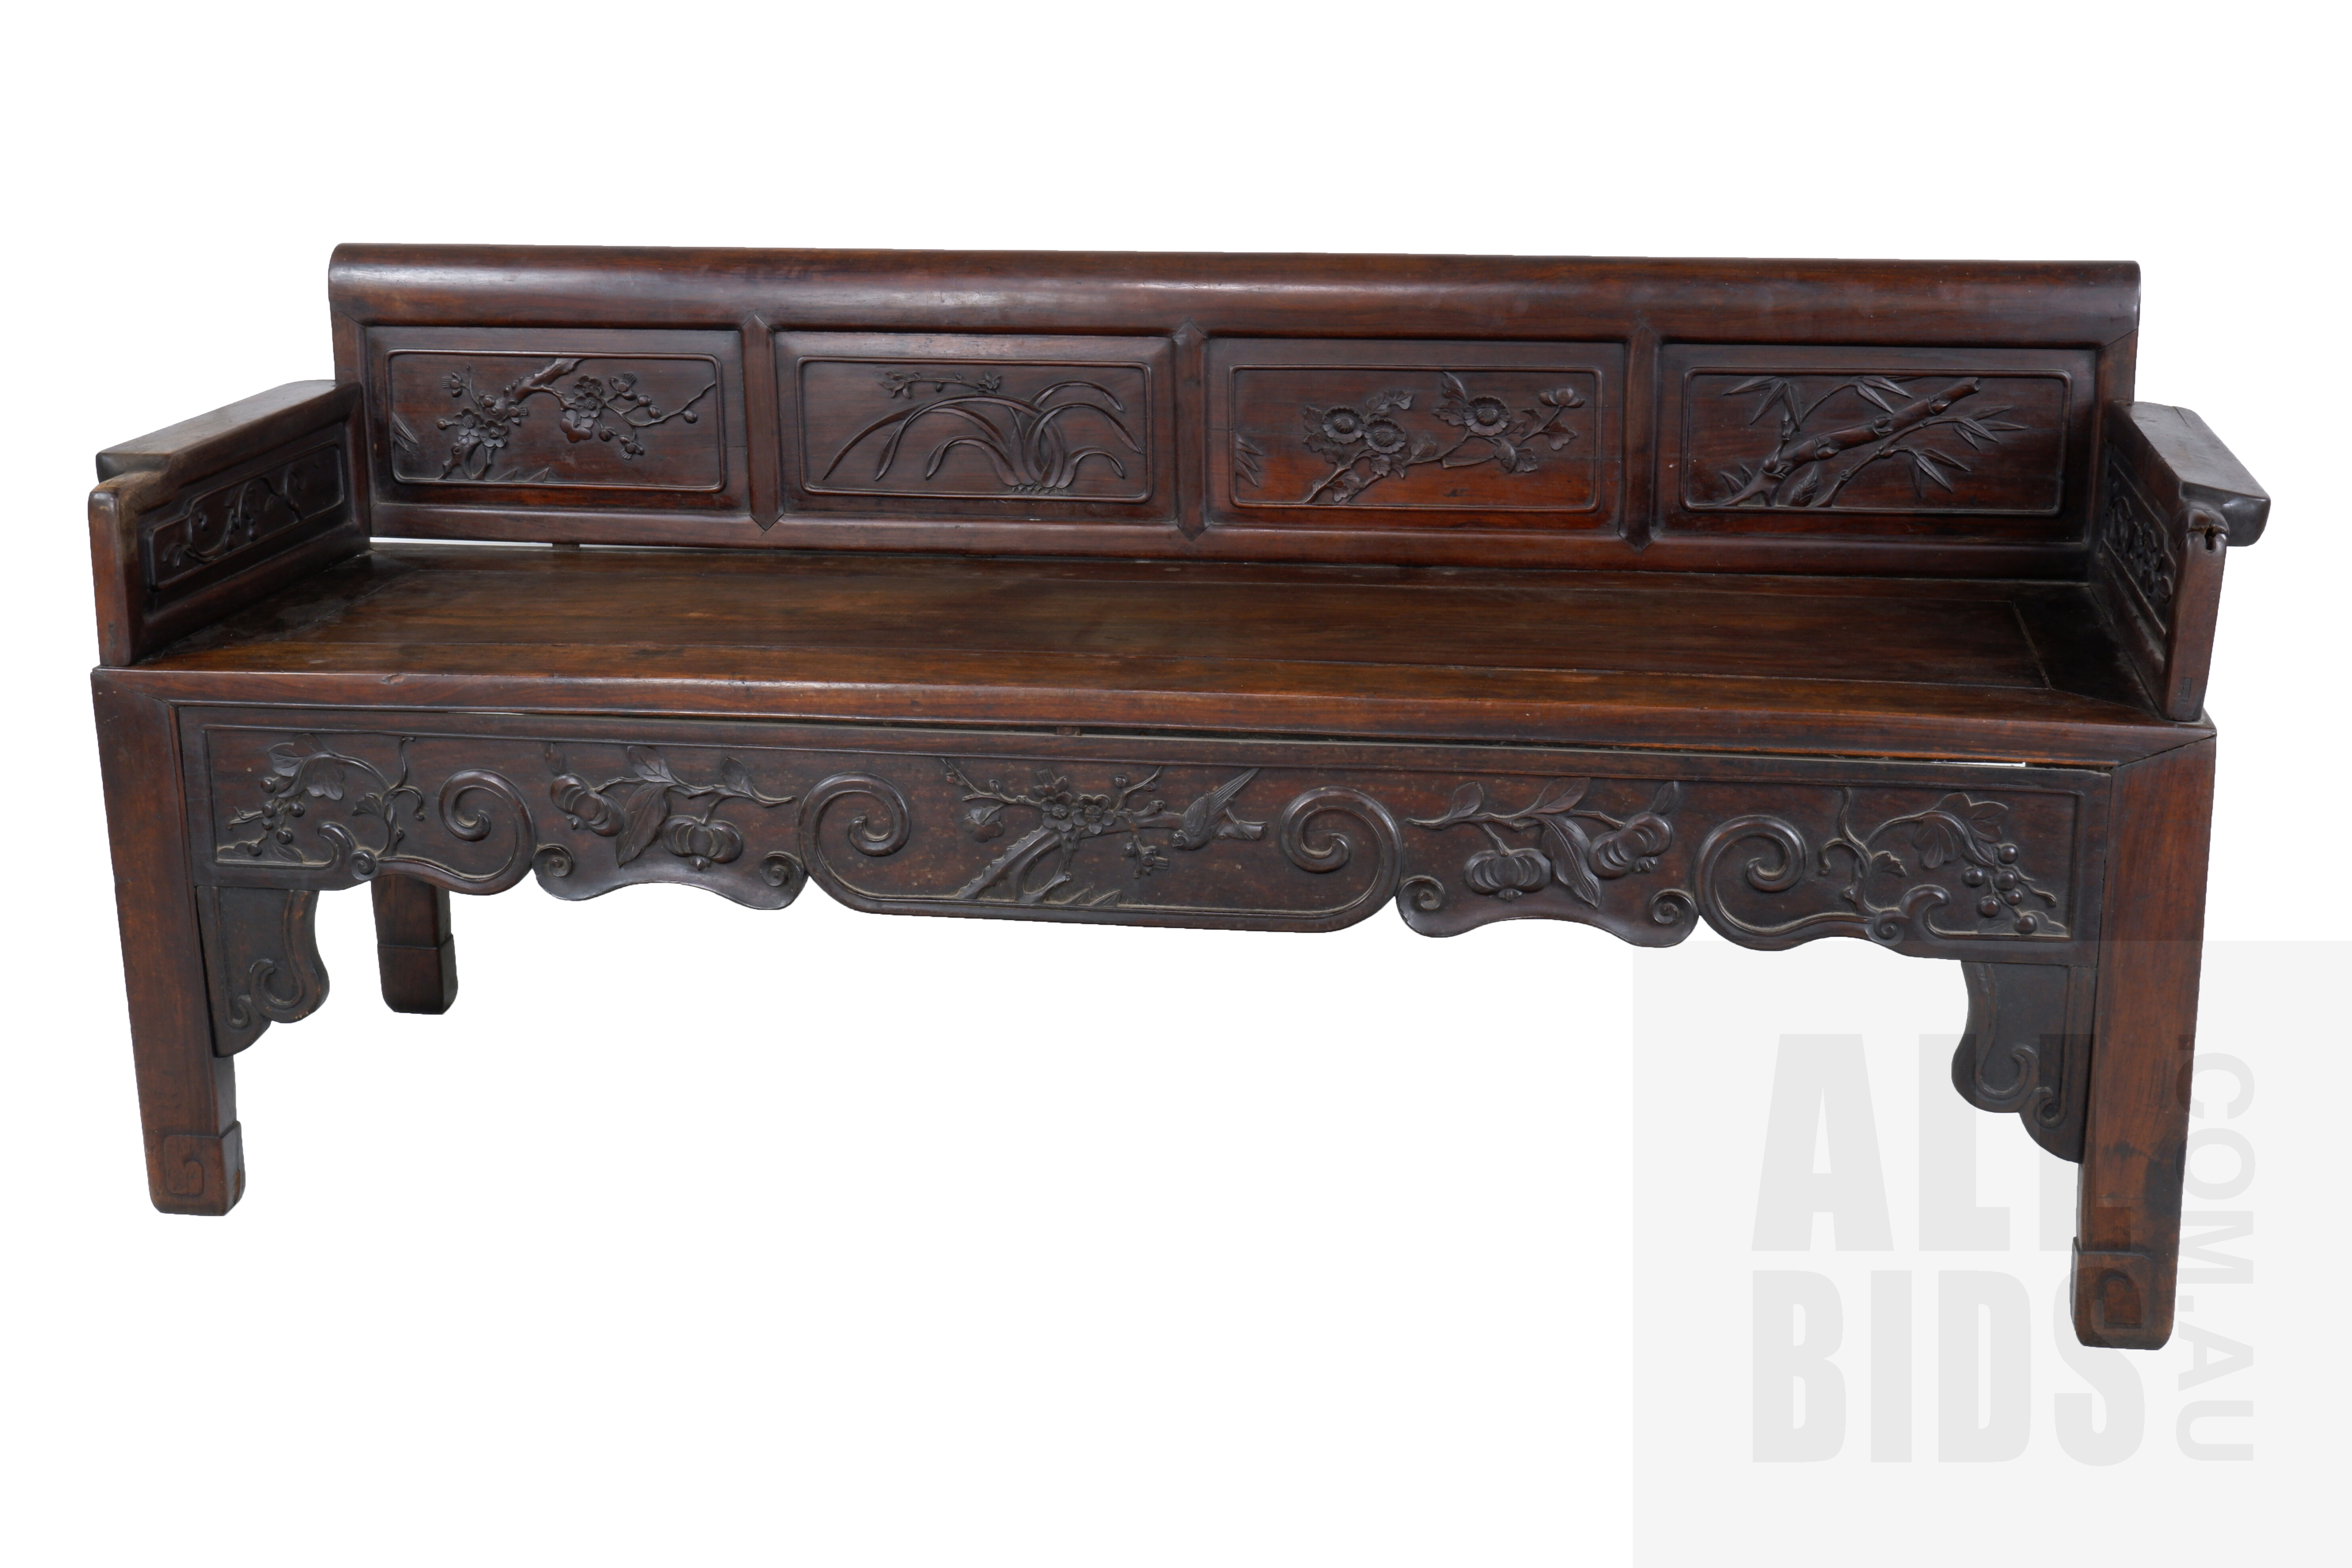 'Antique Chinese Finely Carved Hongmu Rosewood Bench, Late Qing Dynasty'